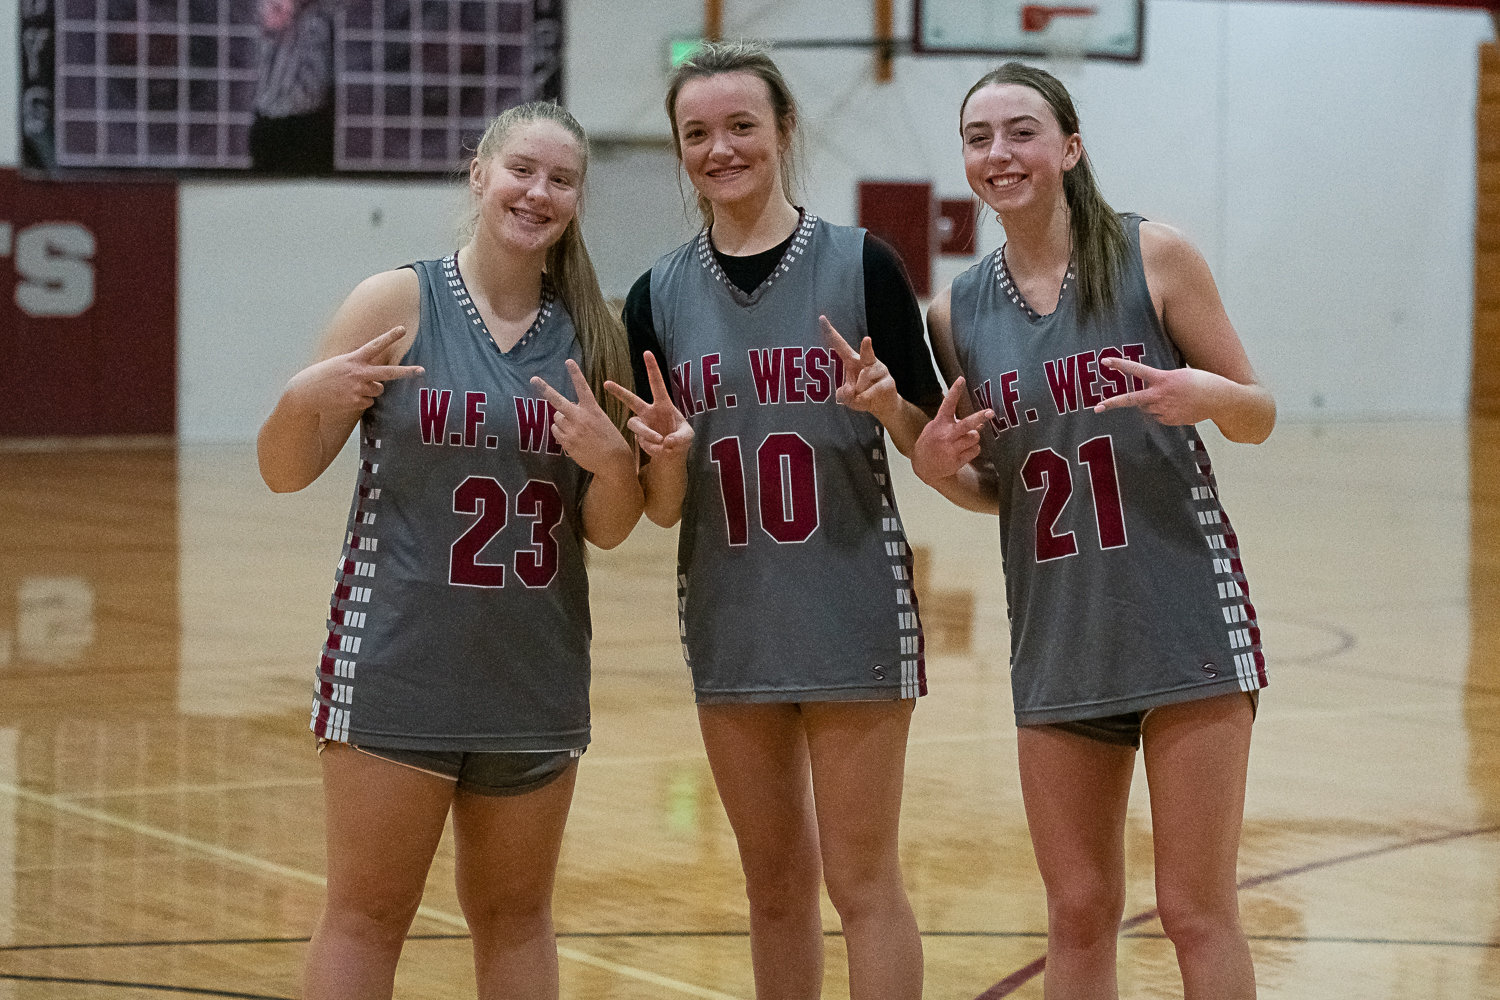 W.F. West players Carlie Deskins (23), Grace Simpson (10), and Morgan Rogerson (21) poses for a photo after practice Nov. 22.